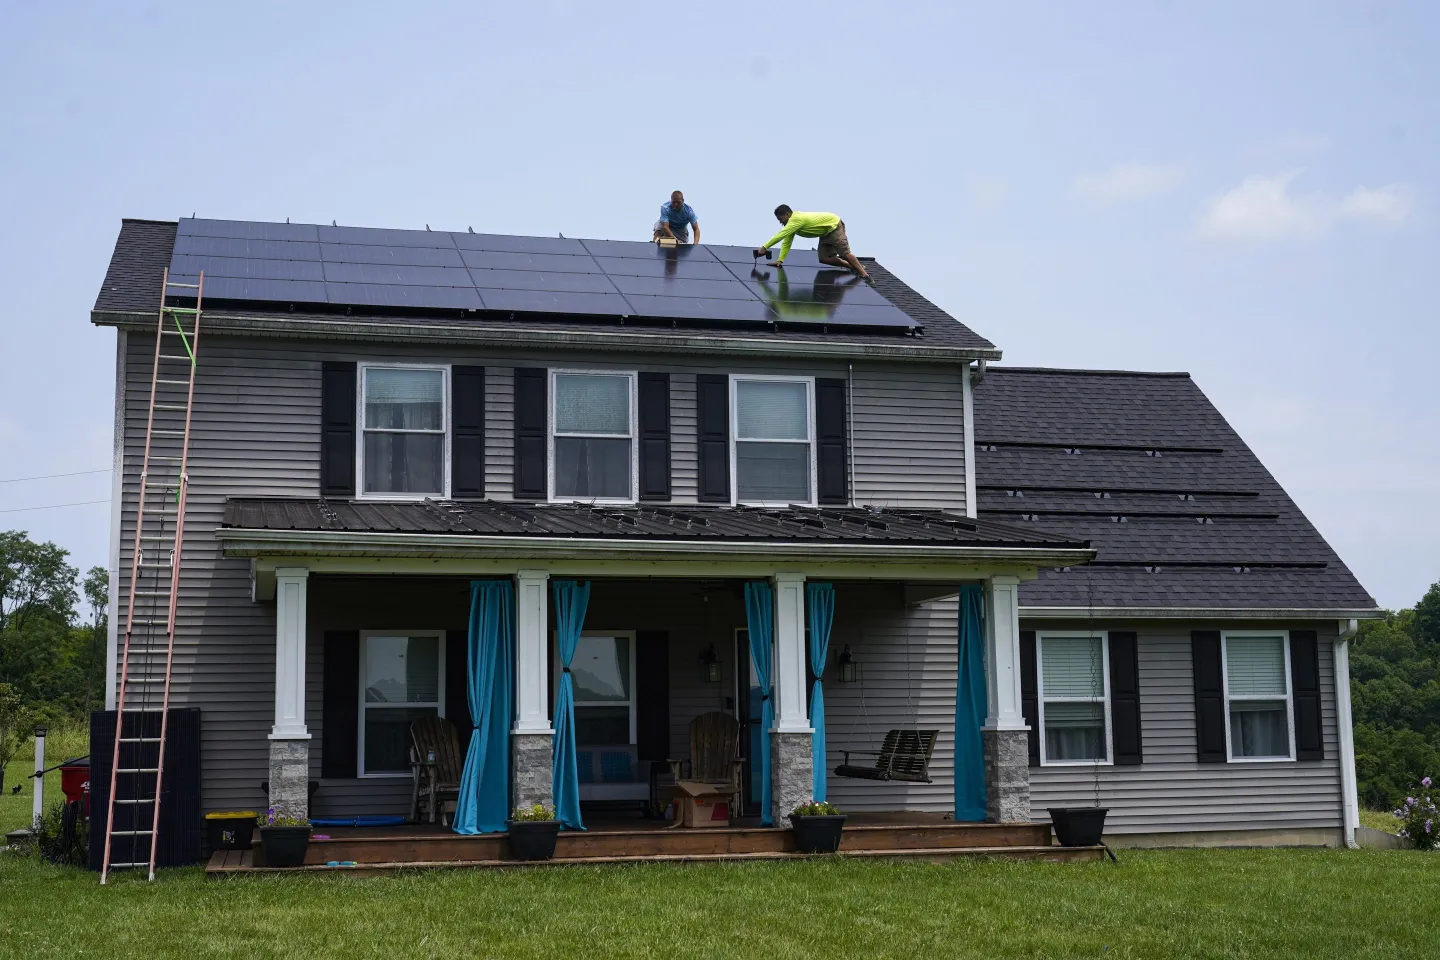 Solar Rooftops Gain Traction As Electric Vehicles Owners Look To Skip Paying For Electricity Or Gasoline: ‘Solar Just Makes Sense’